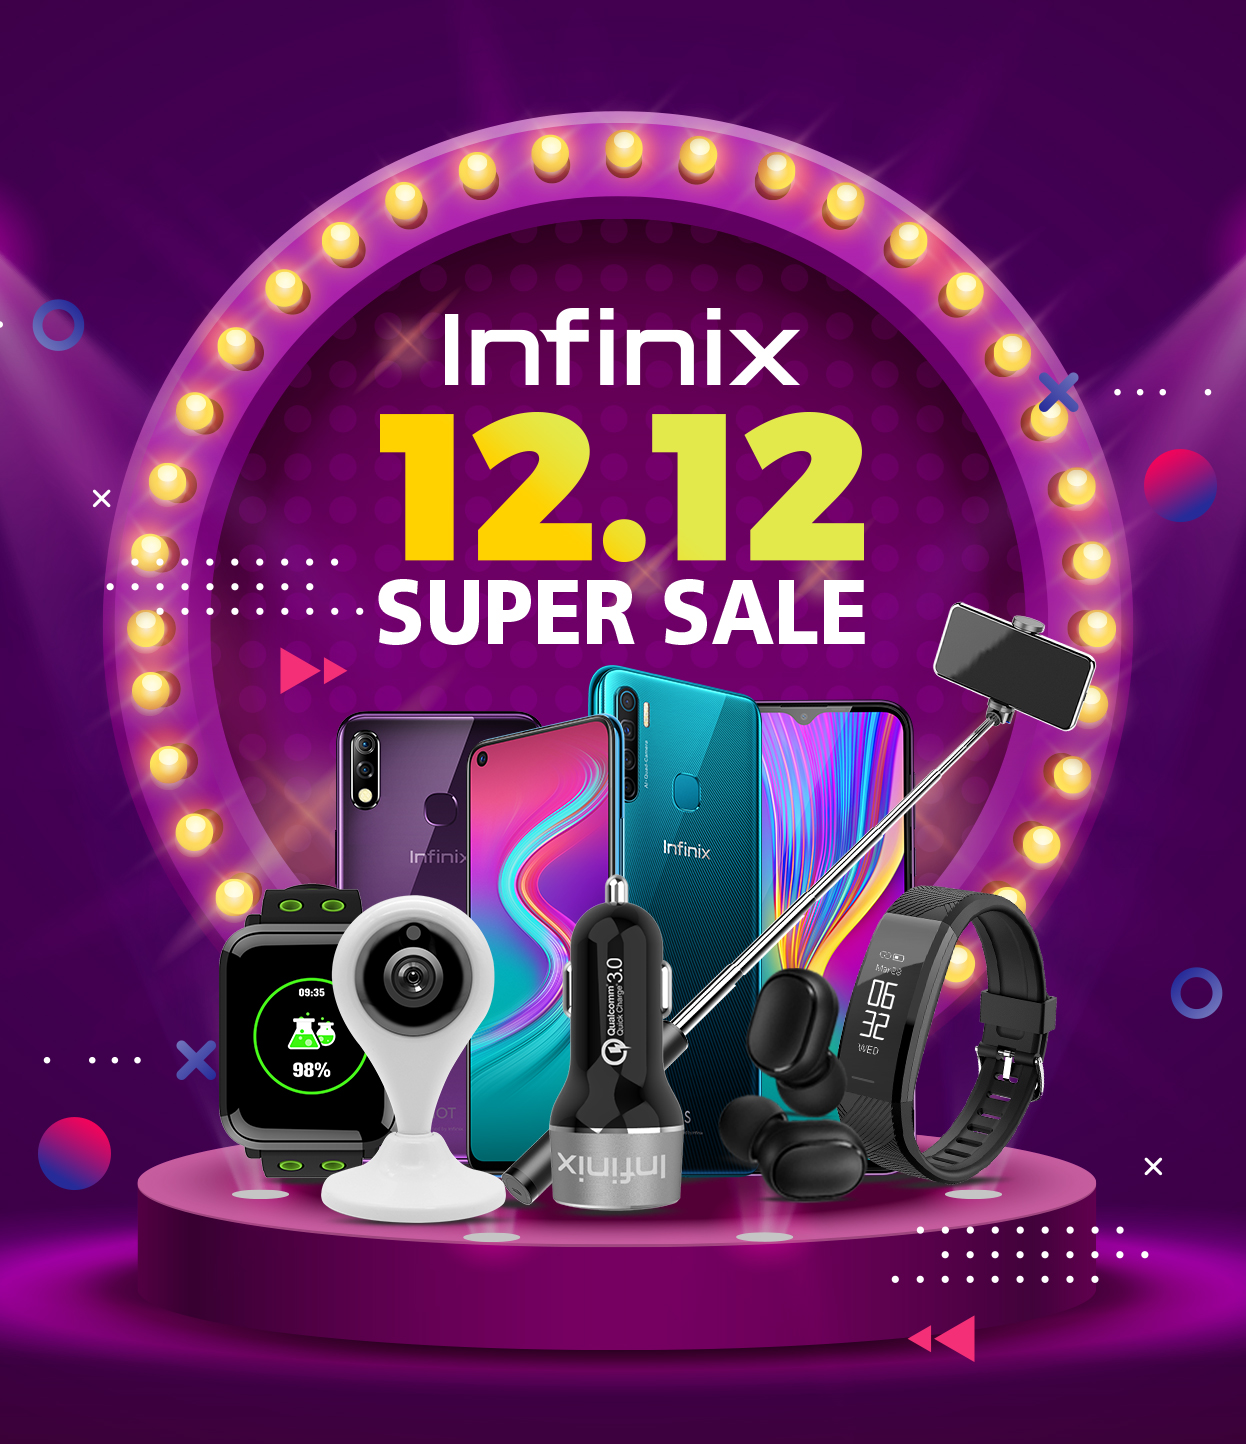 Tremendous response by the customers on Infinix 12.12 grand sale